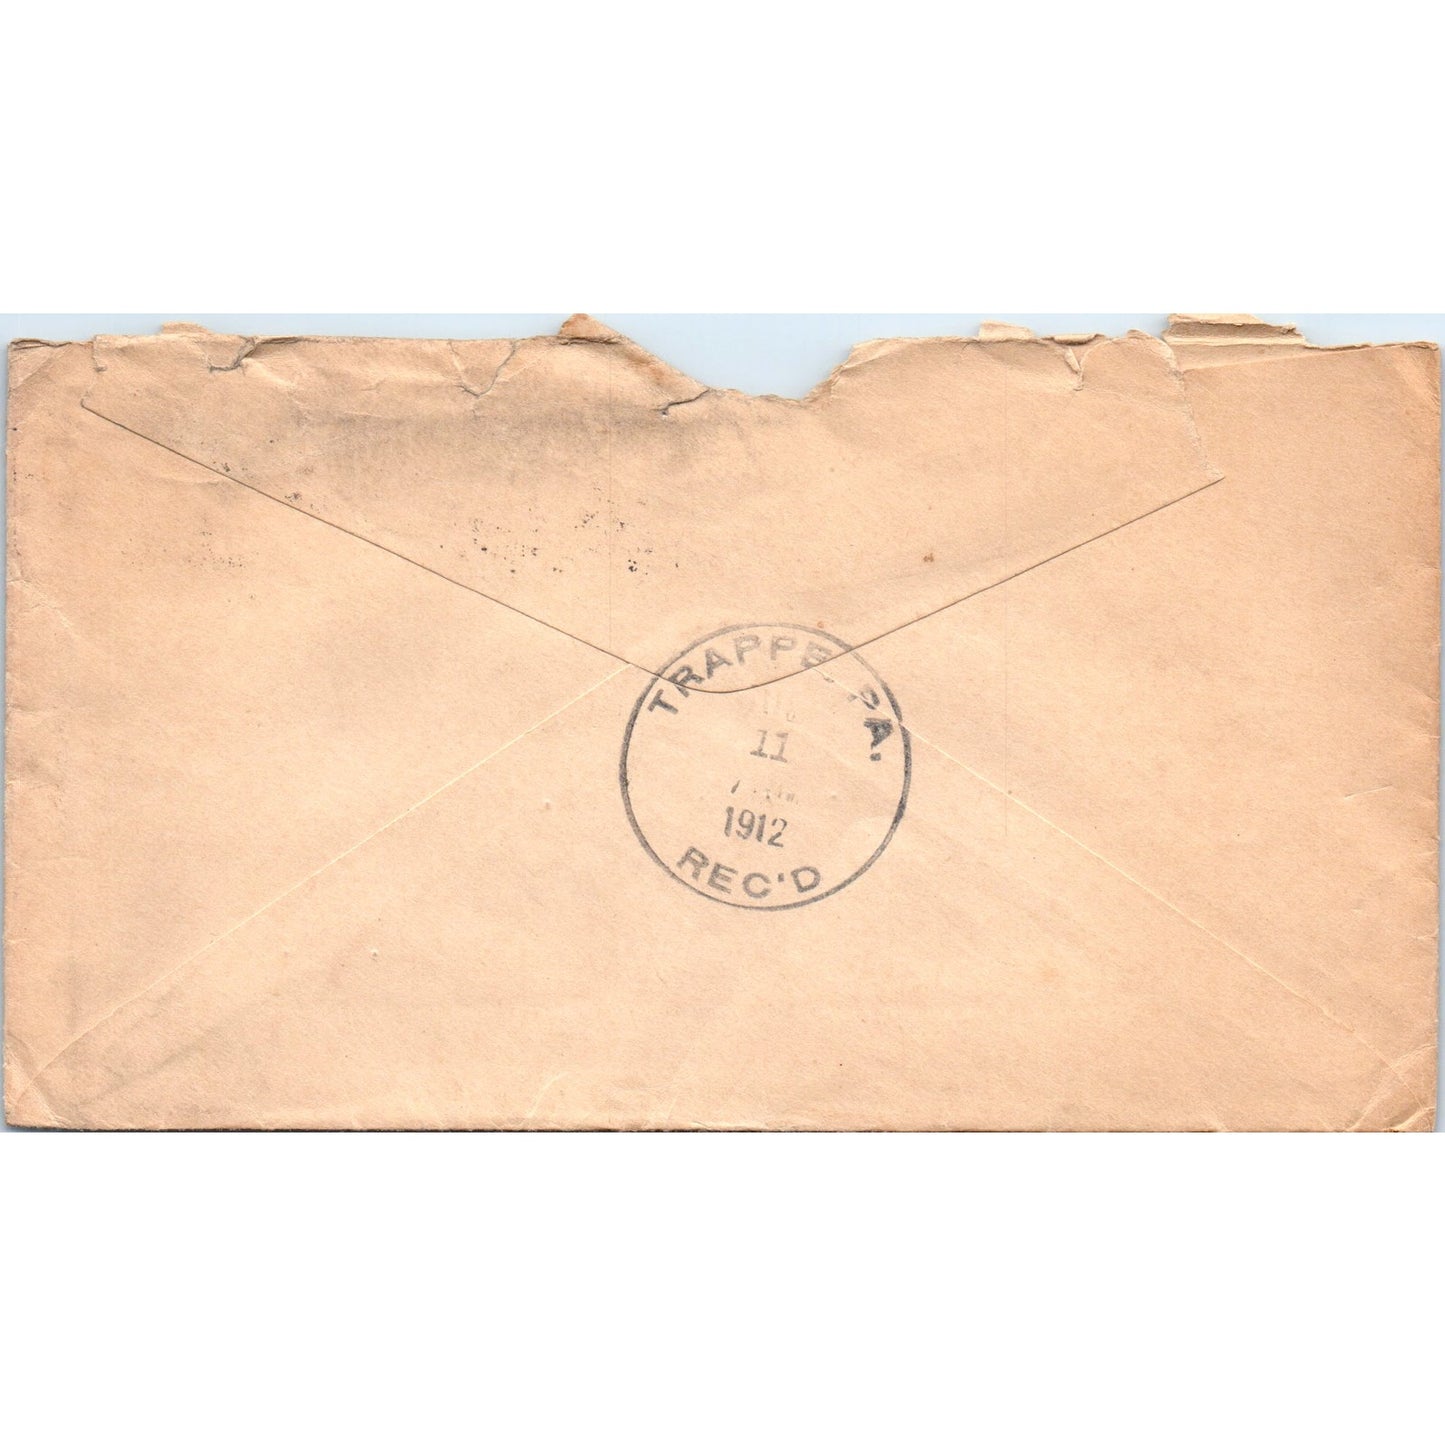 1912 Rumely Products Co Columbus OH to Trappe PA Postal Cover Envelope TG7-PC3